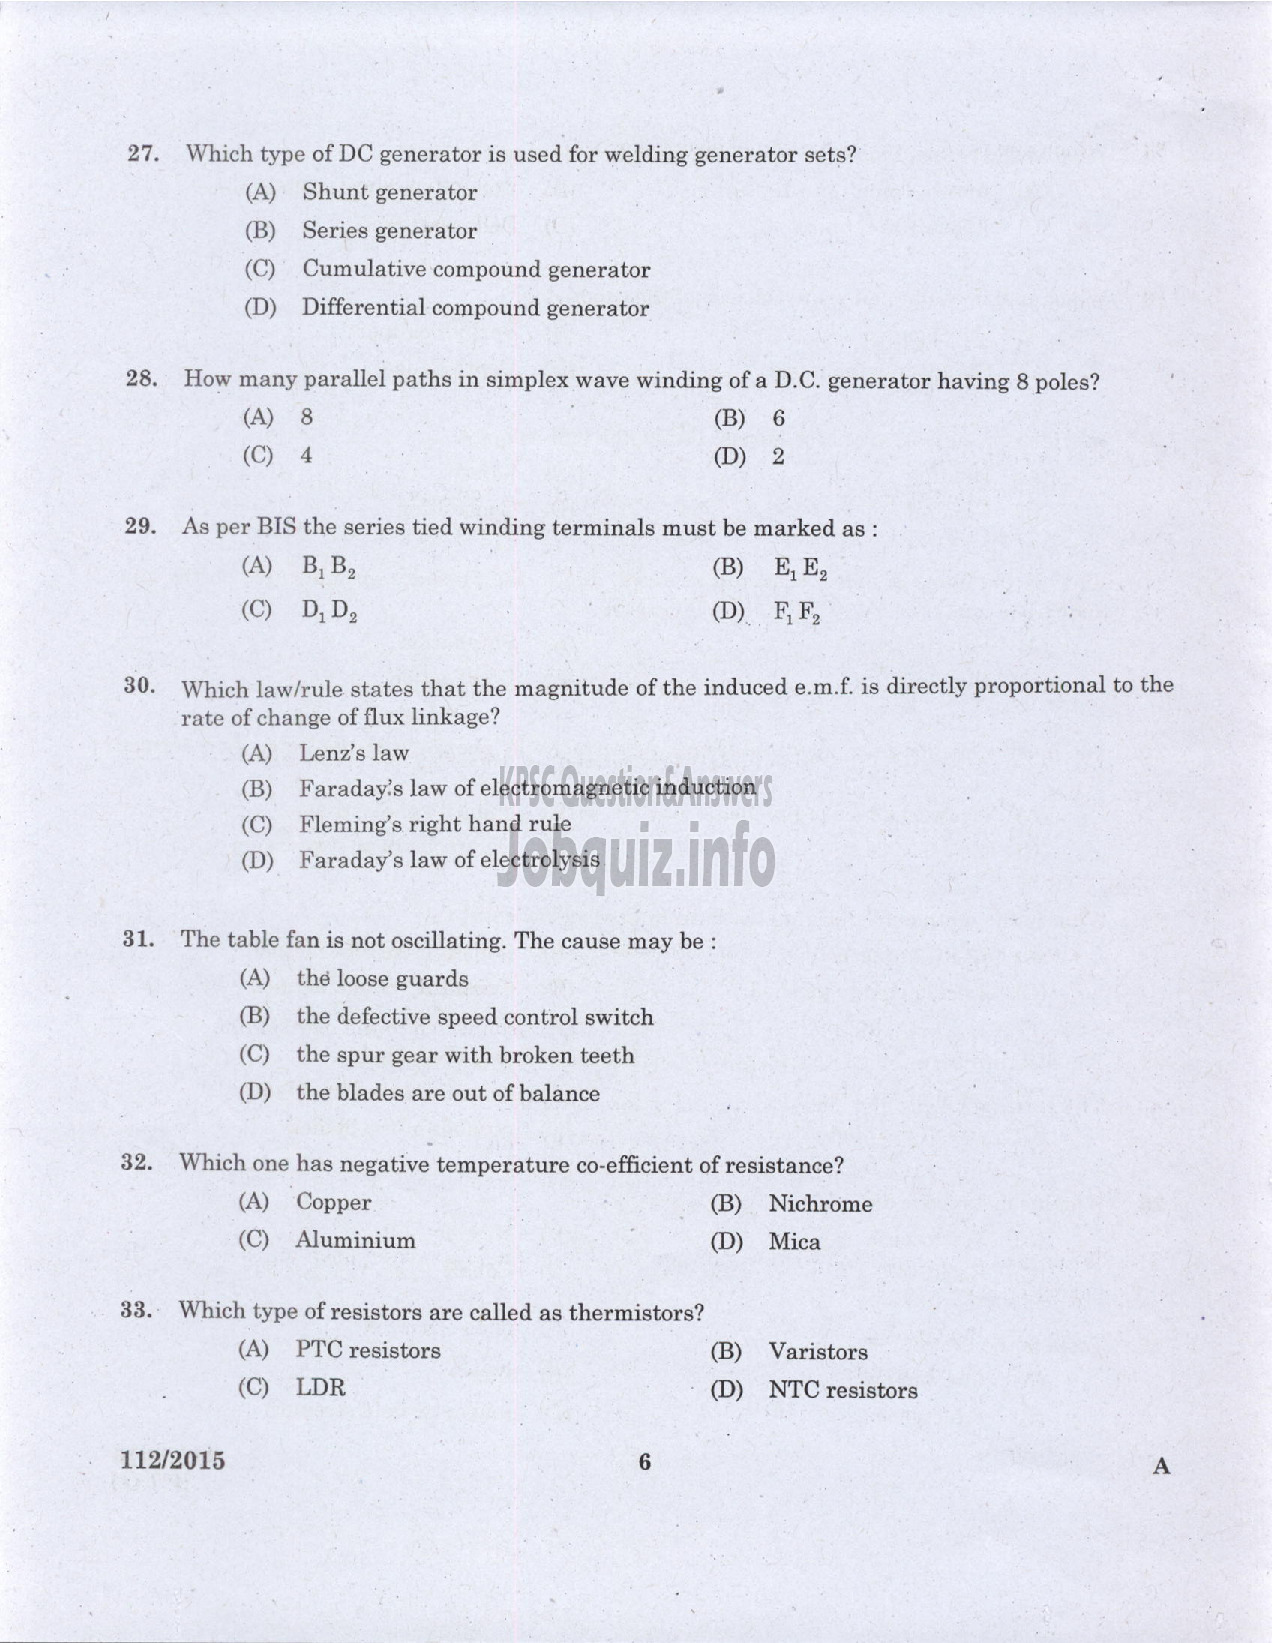 Kerala PSC Question Paper - TRADESMAN ELECTRICAL TECHNICAL EDUCATION/ELECTRICIAN GROUND WATER /ELECTRICIAN GR II PRINTING GOVT PRESSES ELECTRICIAN AGRICULTURE /ELECTRICIAN GR II THE KERALA CERAMICS LTD-4